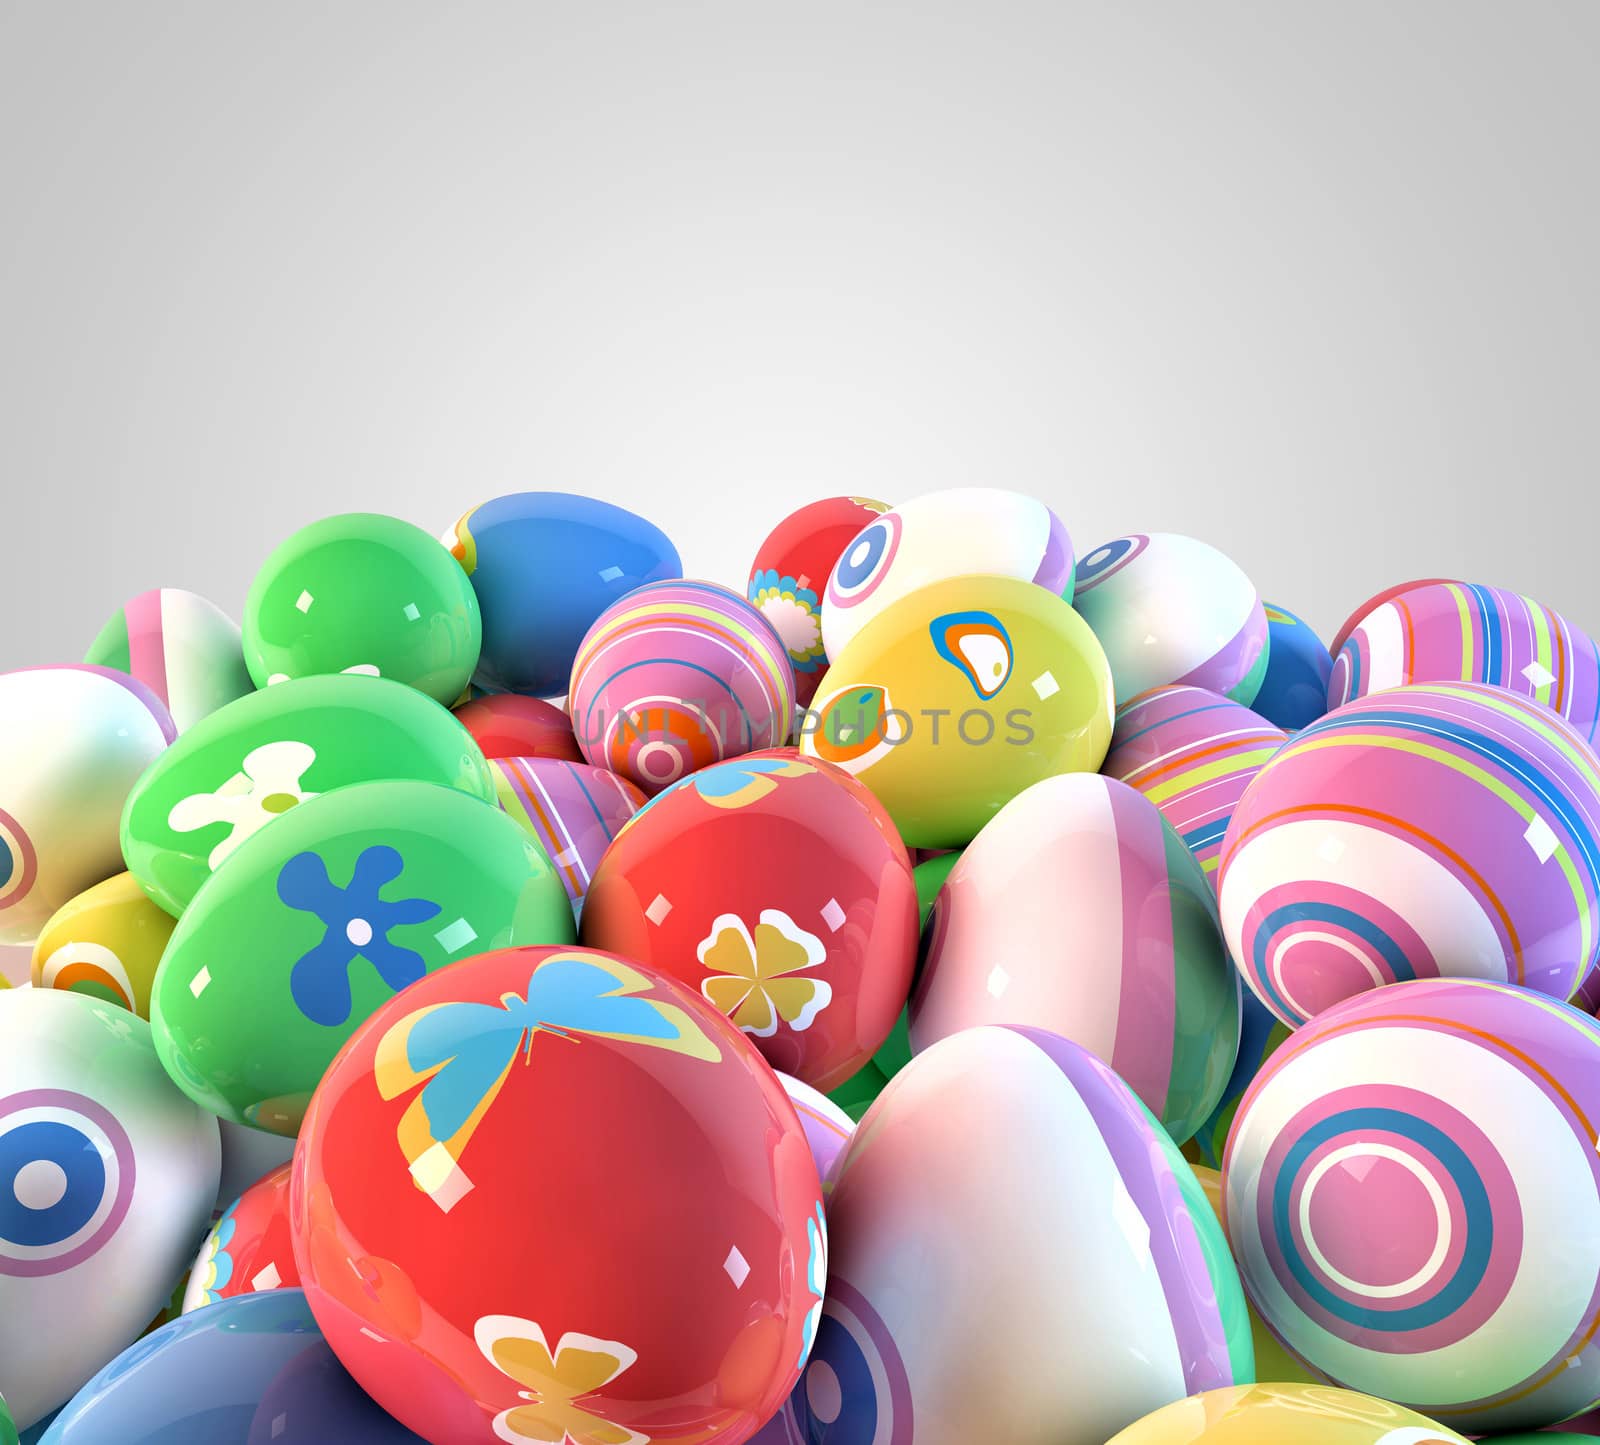 Easter eggs background by dynamicfoto